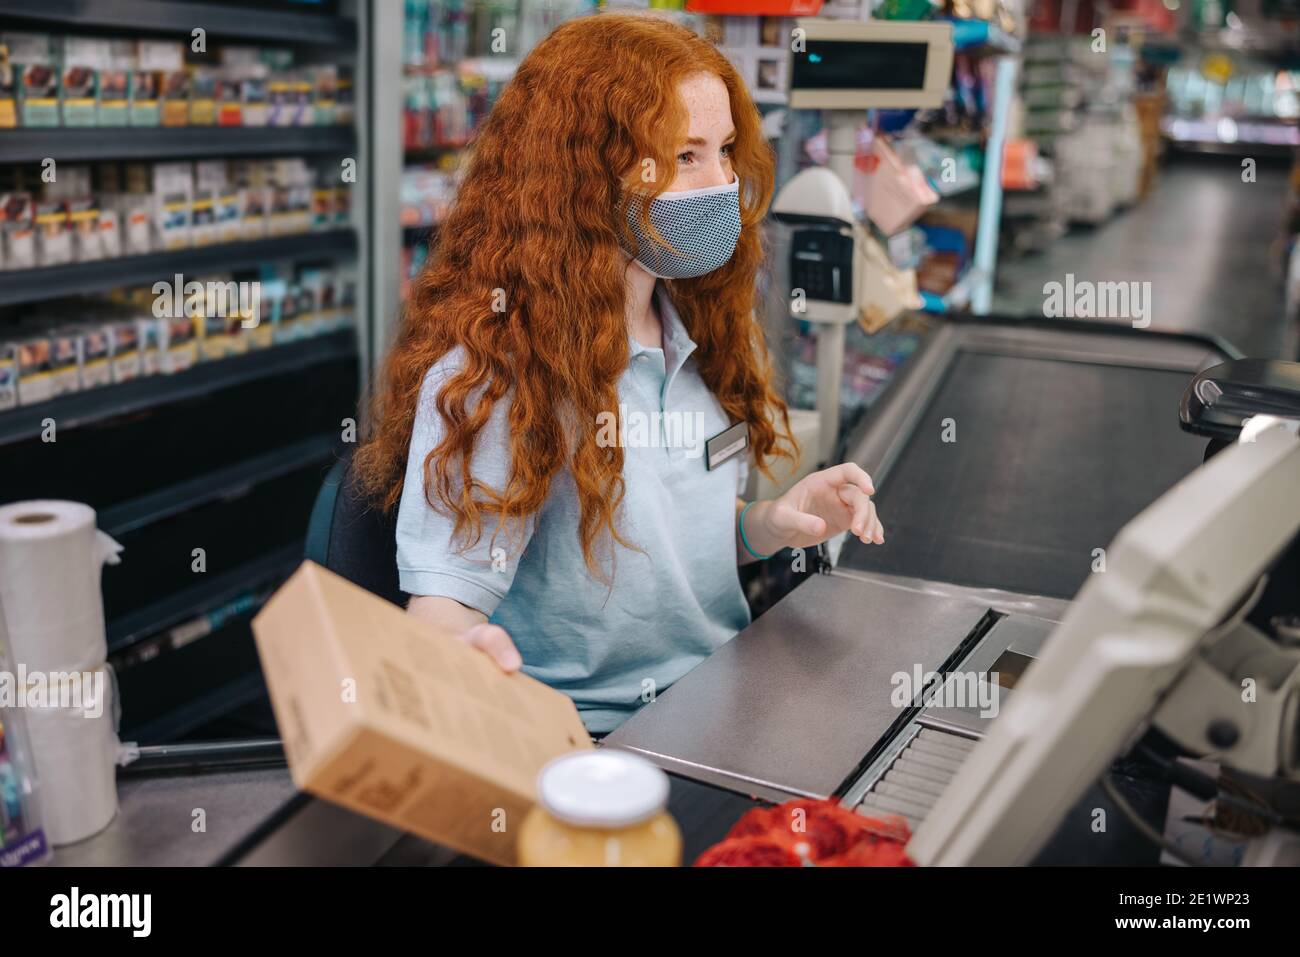 Female Grocery Store Worker Working At Checkout Counter Woman Cashier